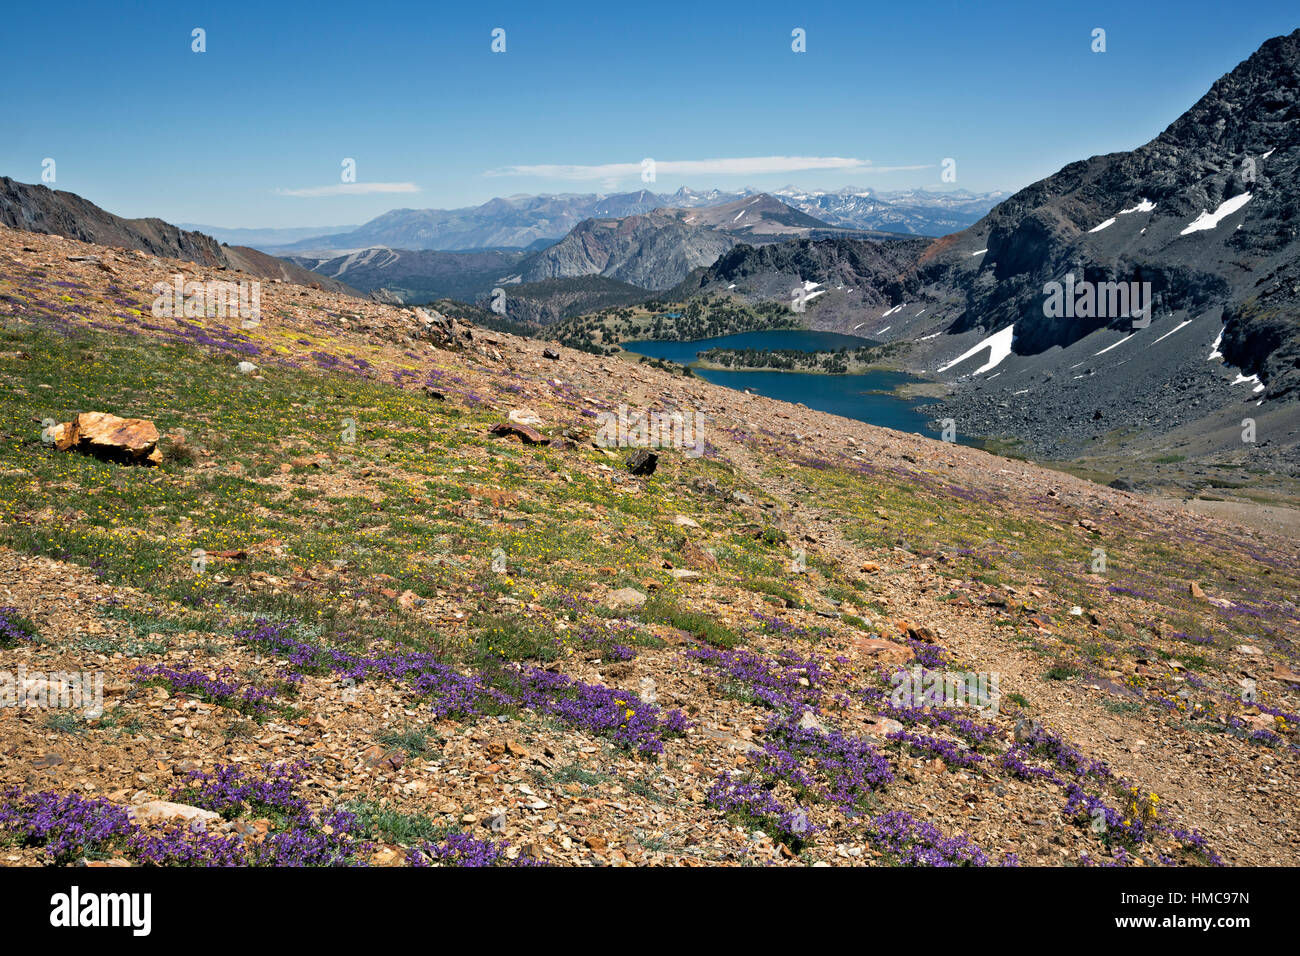 CA02995-00...CALIFORNIA - Wildflowers blooming along the trail below Koip Peak Pass descending to Alger Lakes in the Ansel Adams Wilderness. Stock Photo